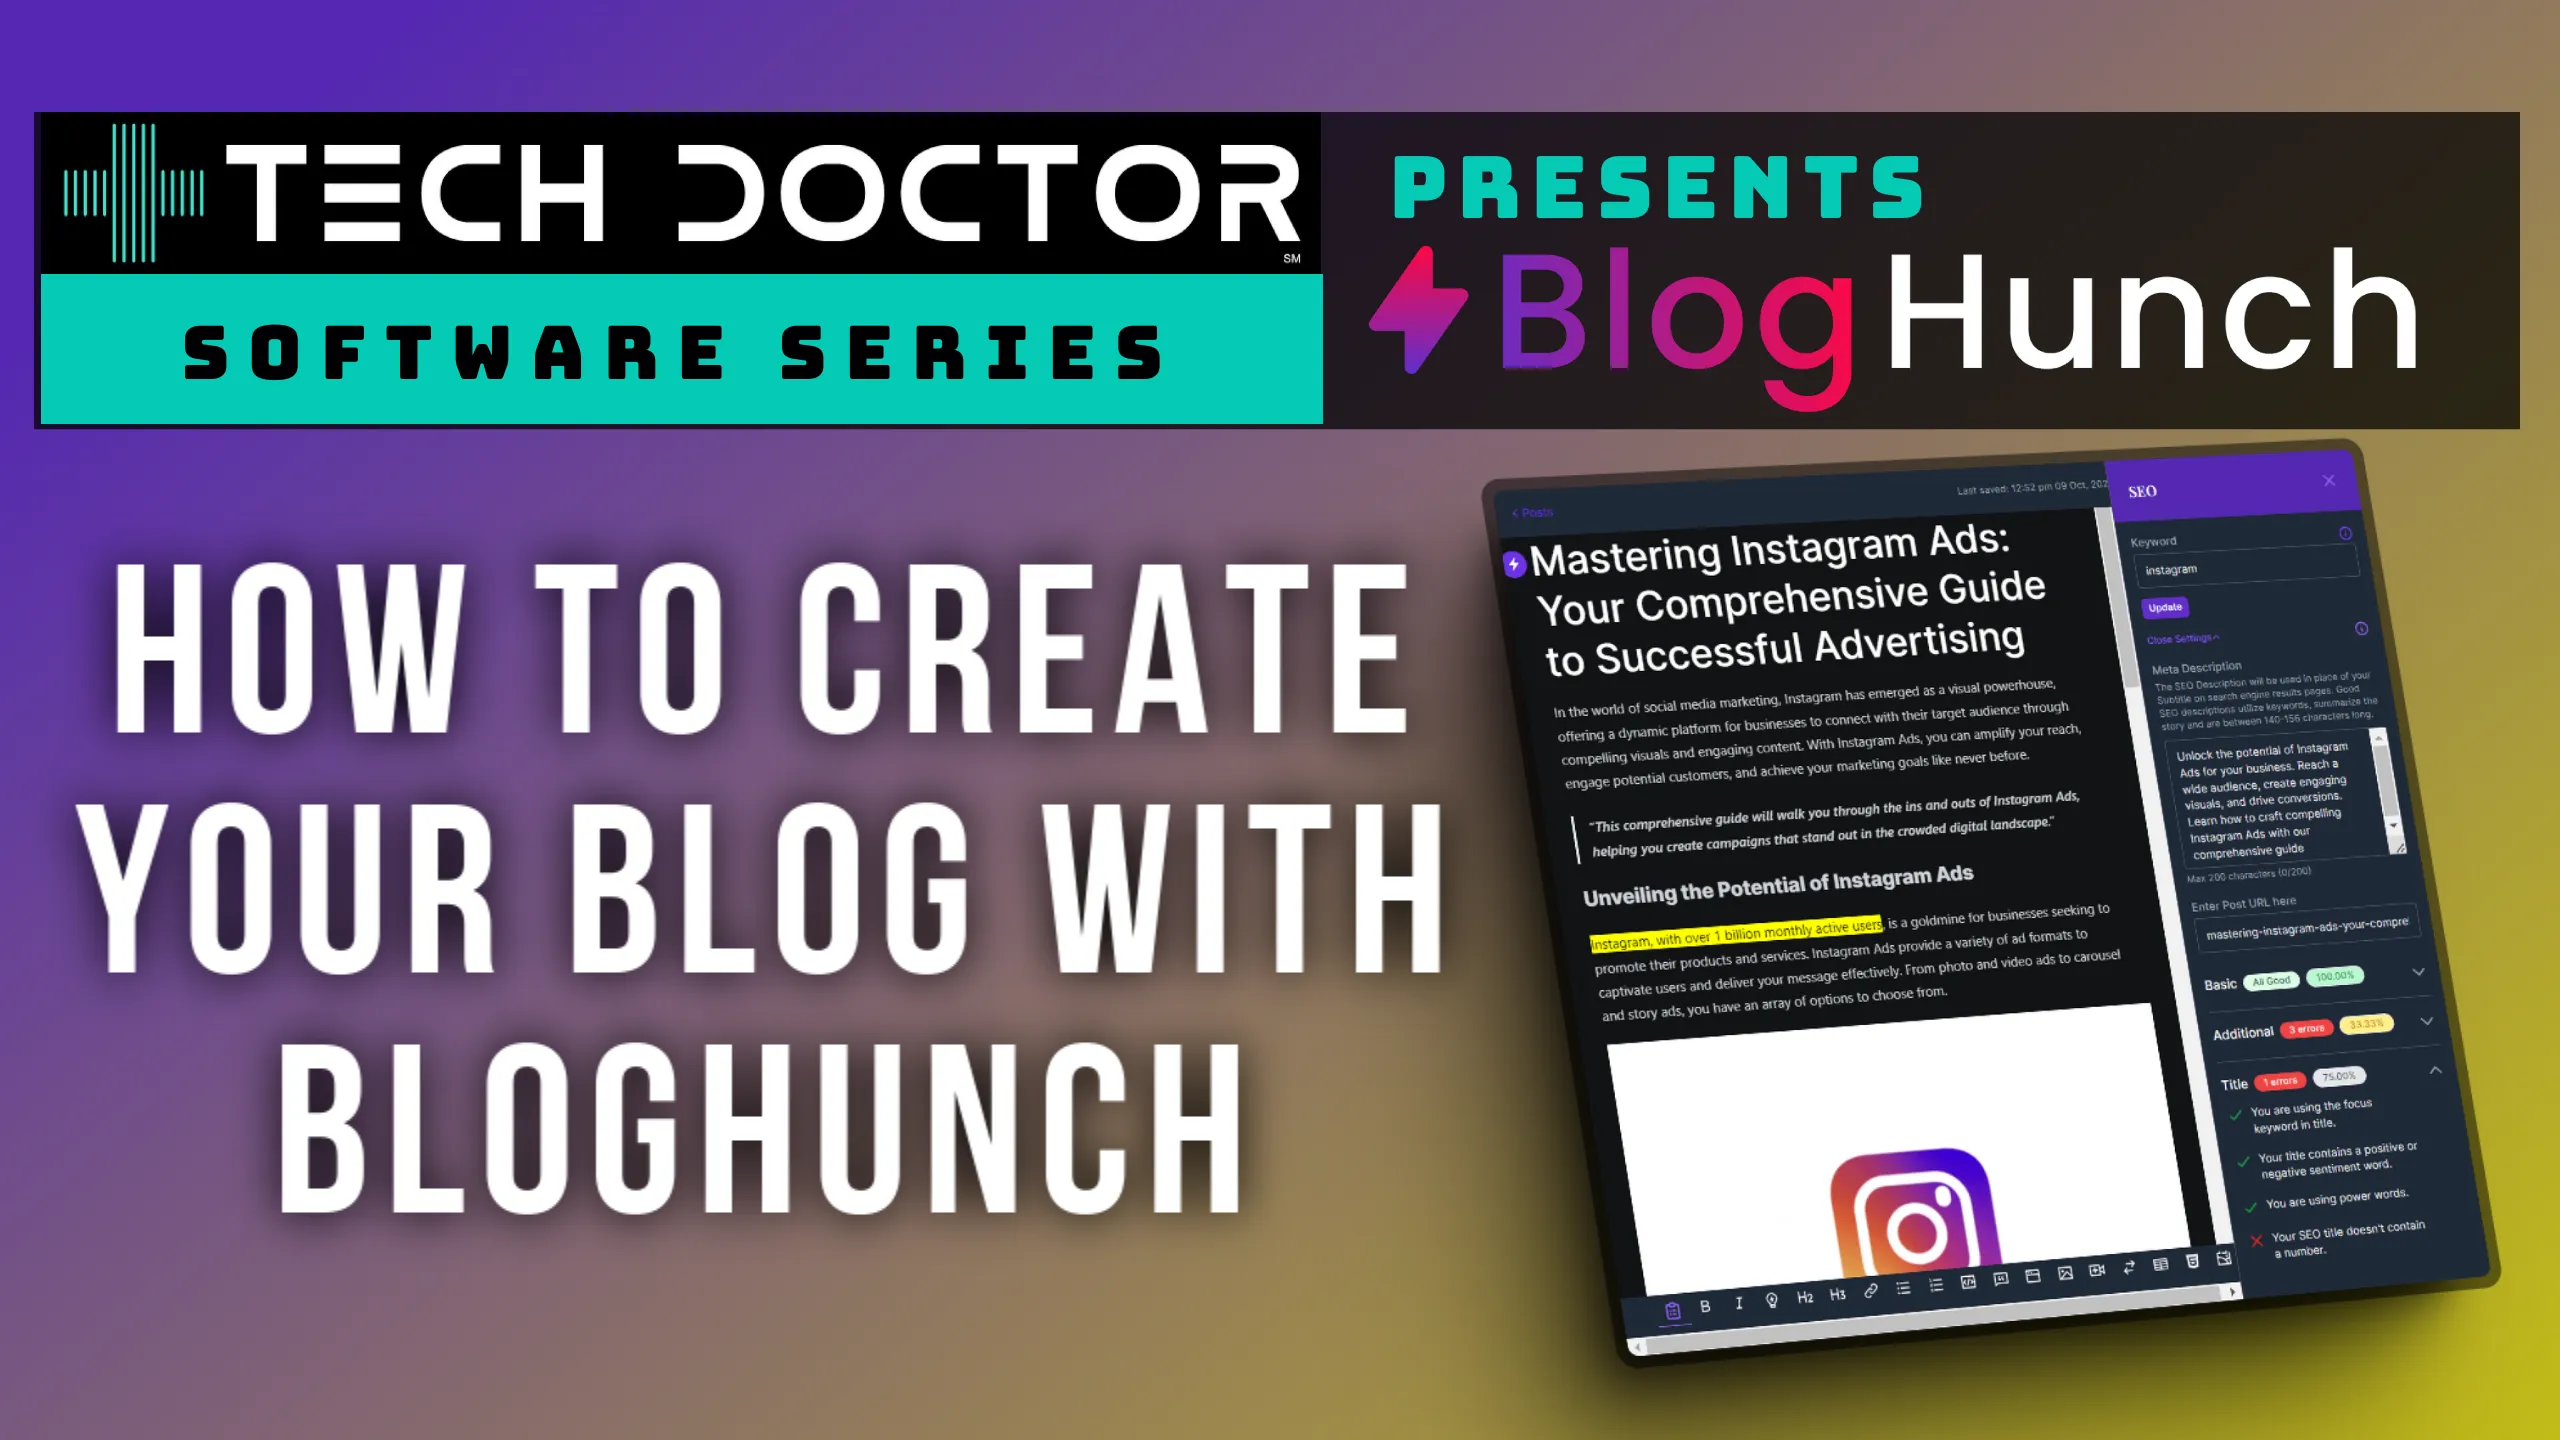 Master the Art of Blogging with BlogHunch